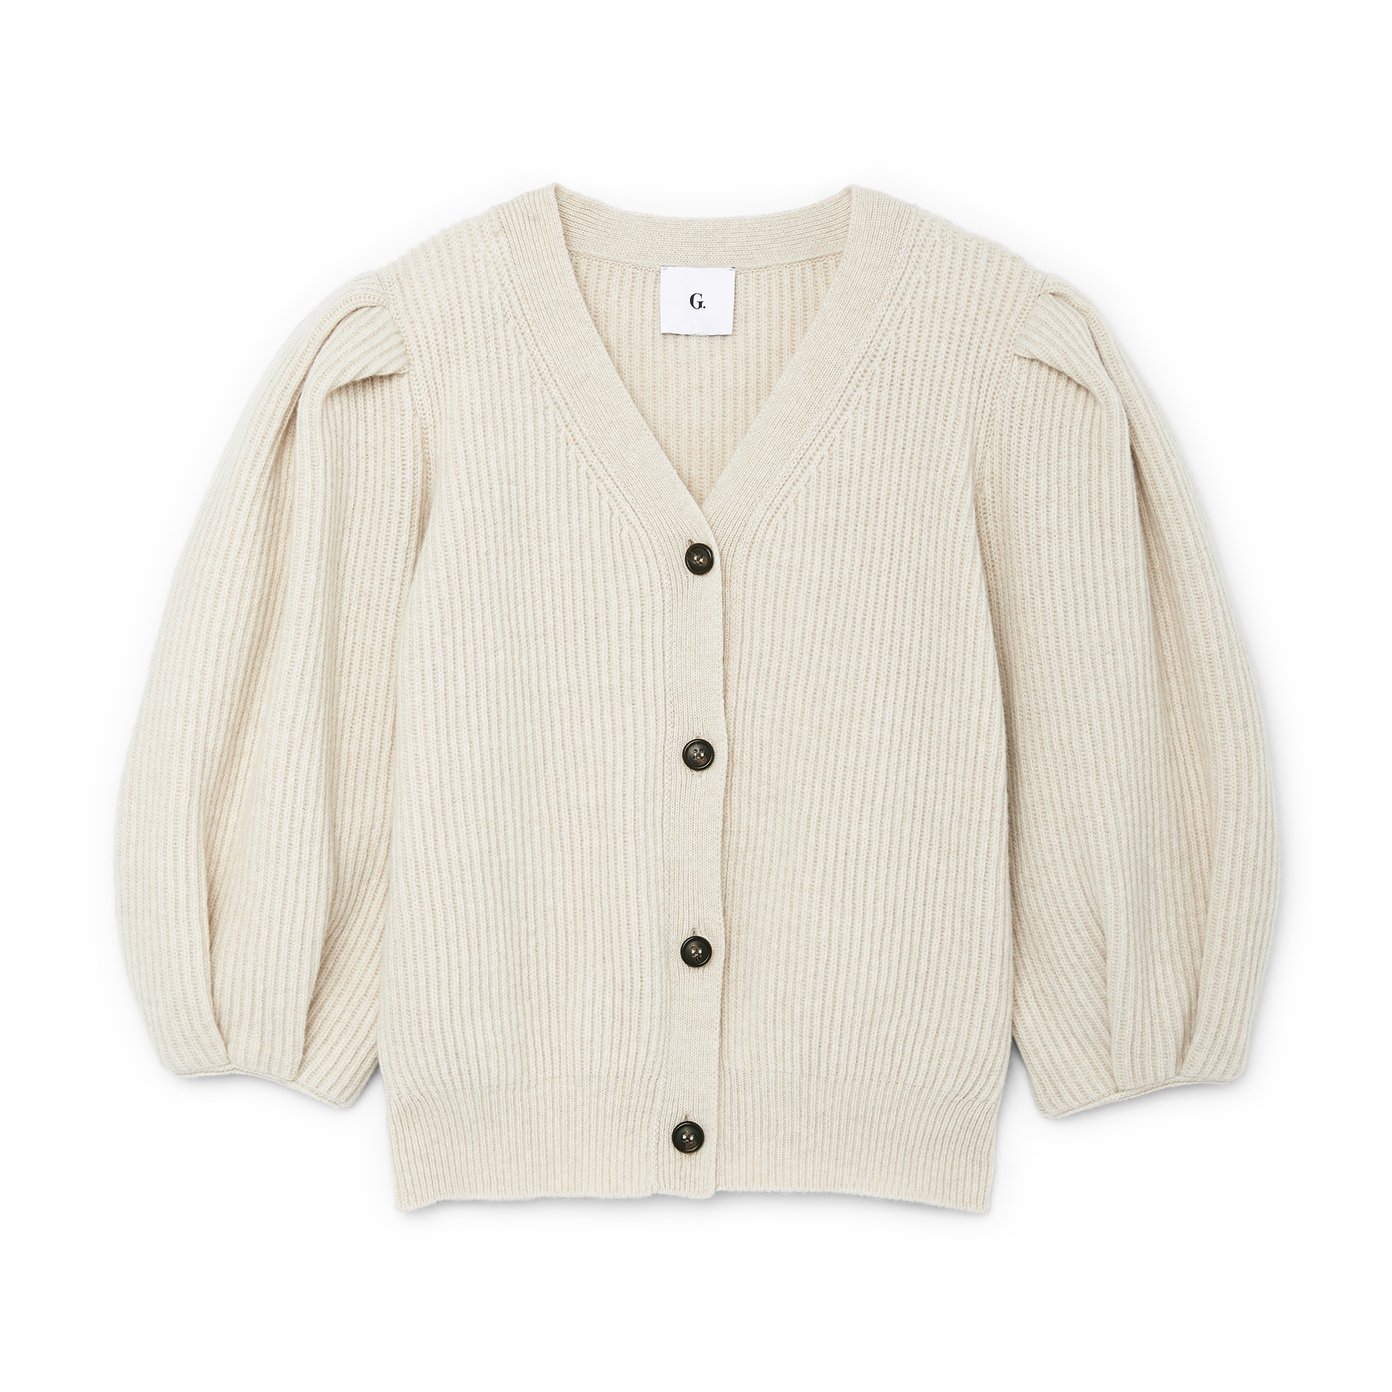 G. Label by goop Foster Ribbed Puff-Sleeve Cardigan | goop